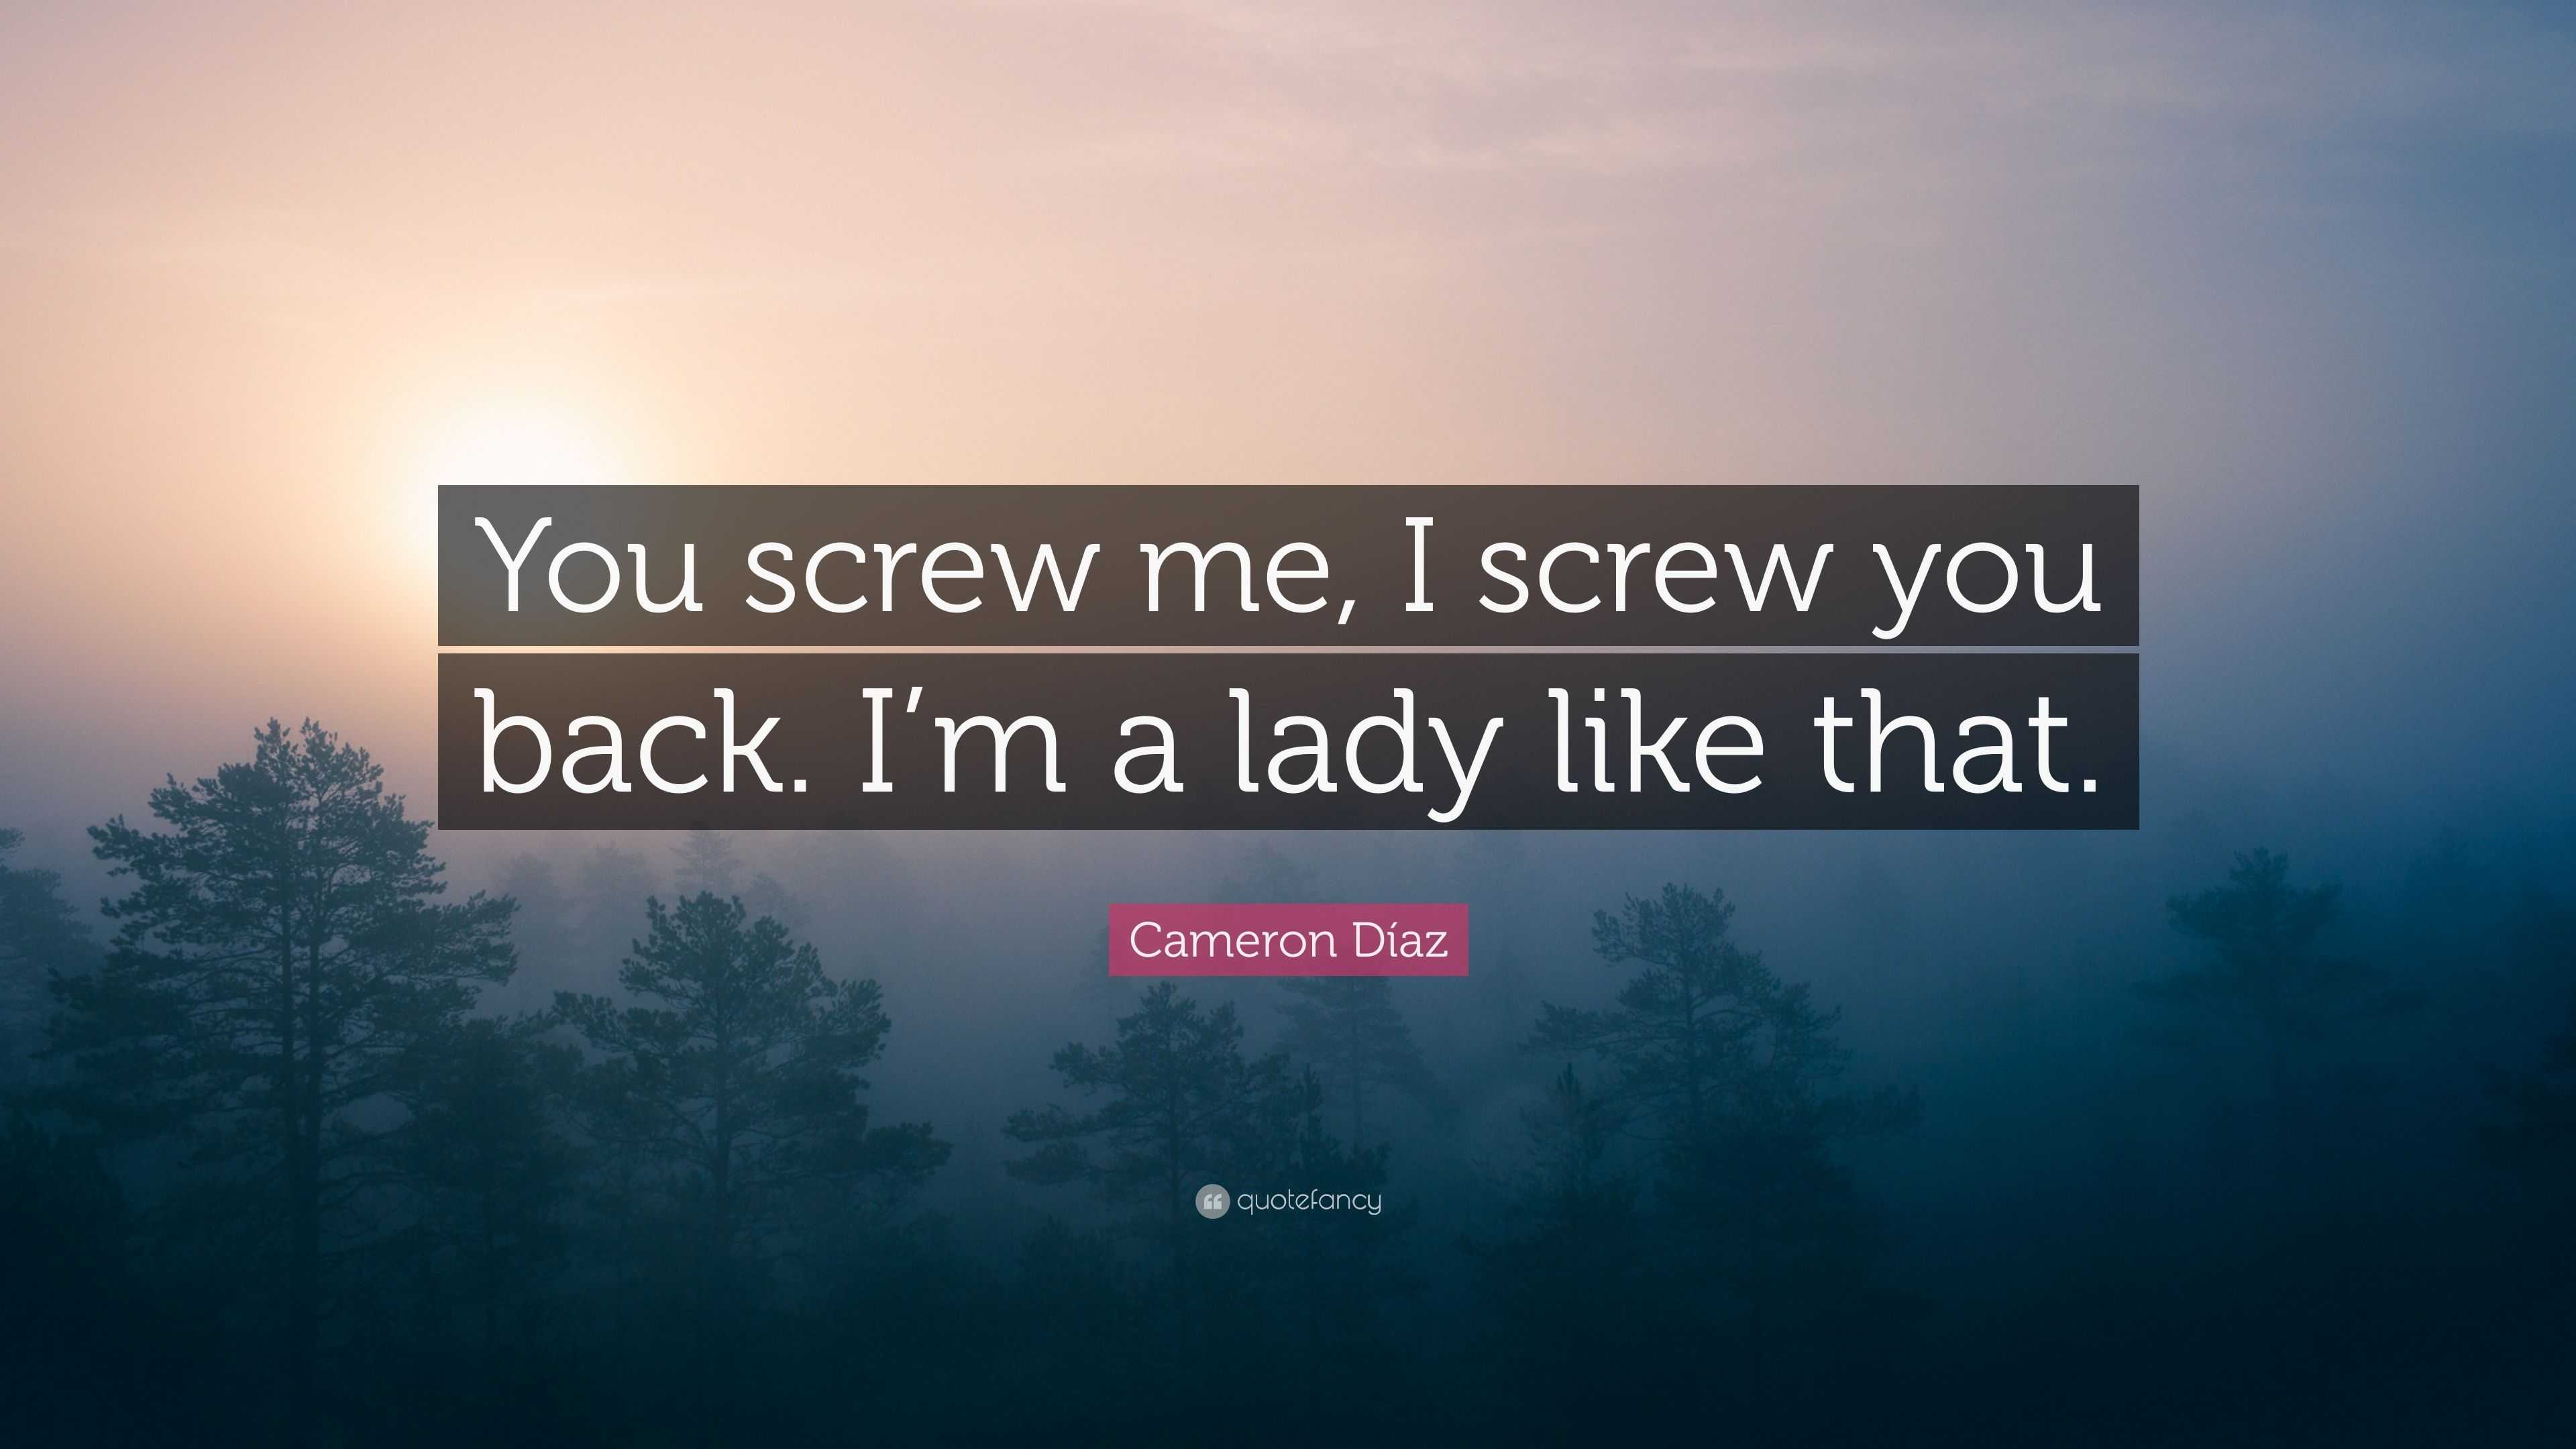 Cameron Díaz Quote: “You screw me, I screw you back. I'm a lady like that.”